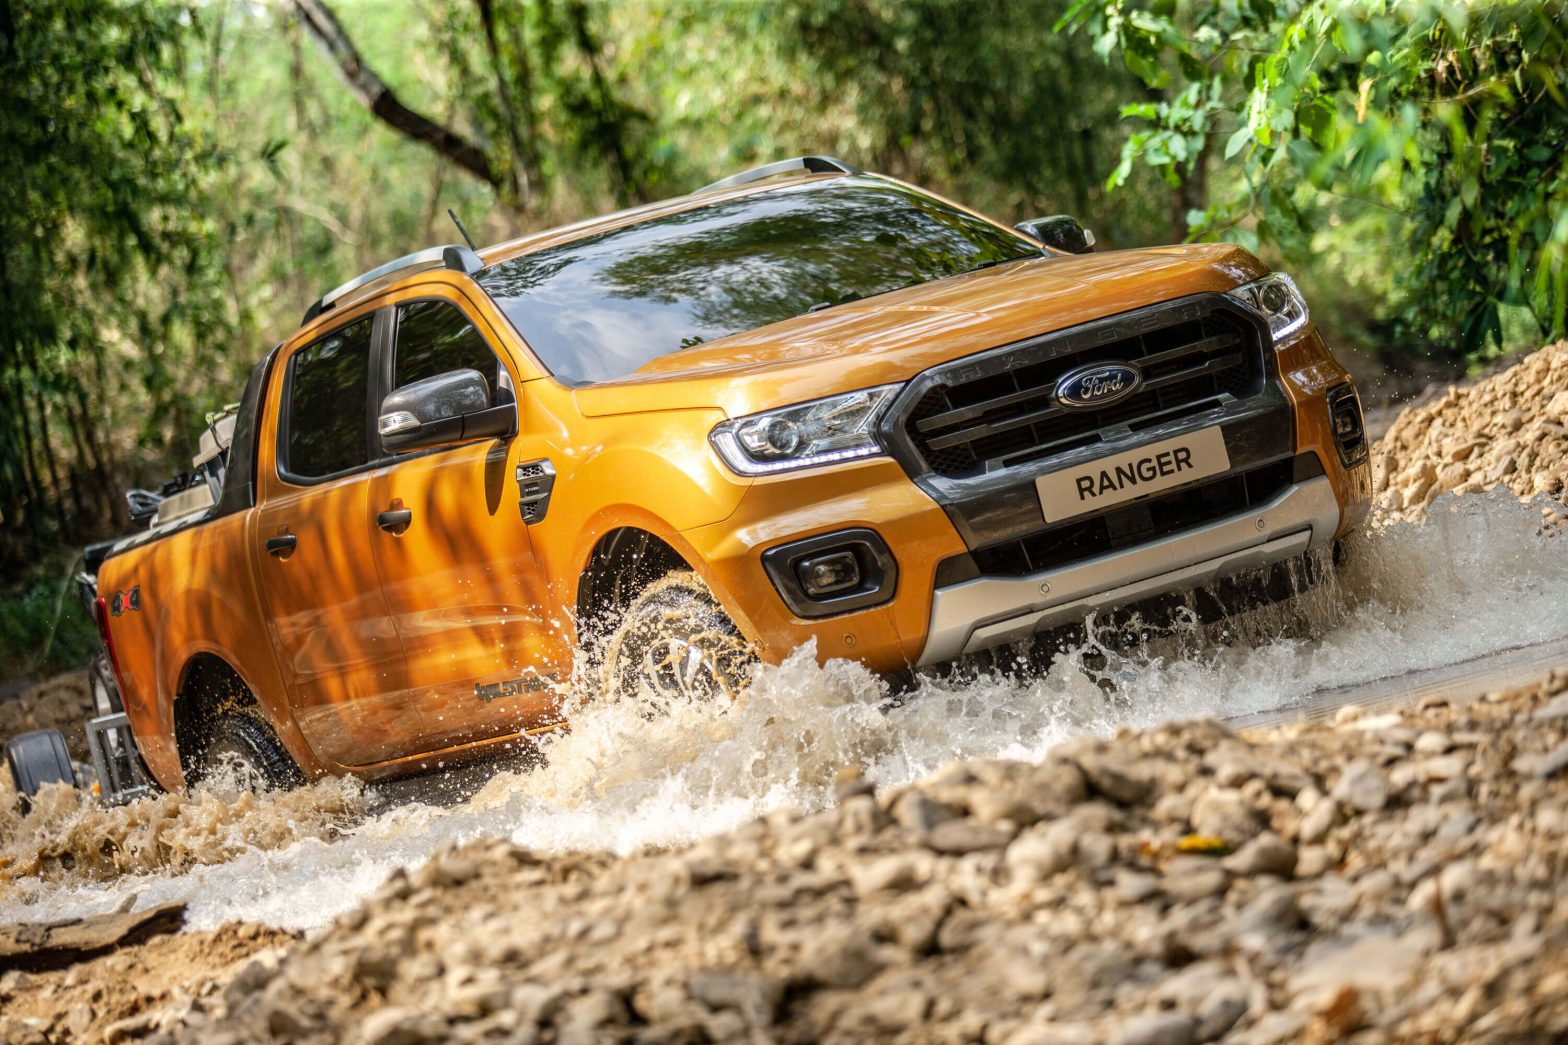 Get best deals for Ford Ranger in October with Ford Truck Month